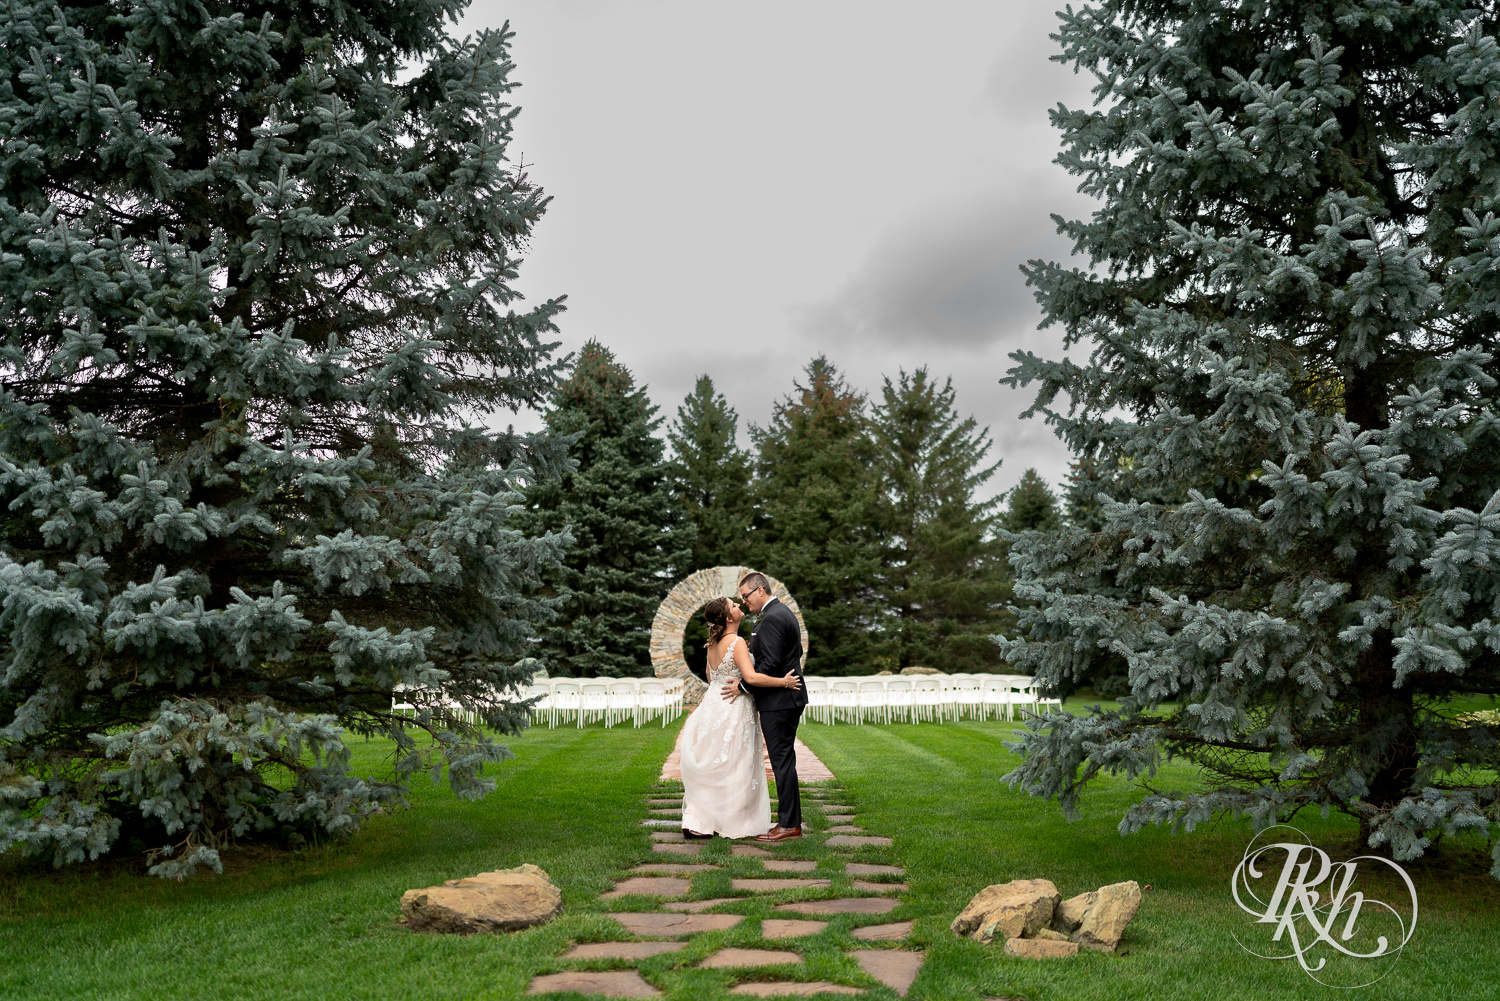 Bride and groom kissing each other on rainy day at Glenhaven Events in Farmington, Minnesota.